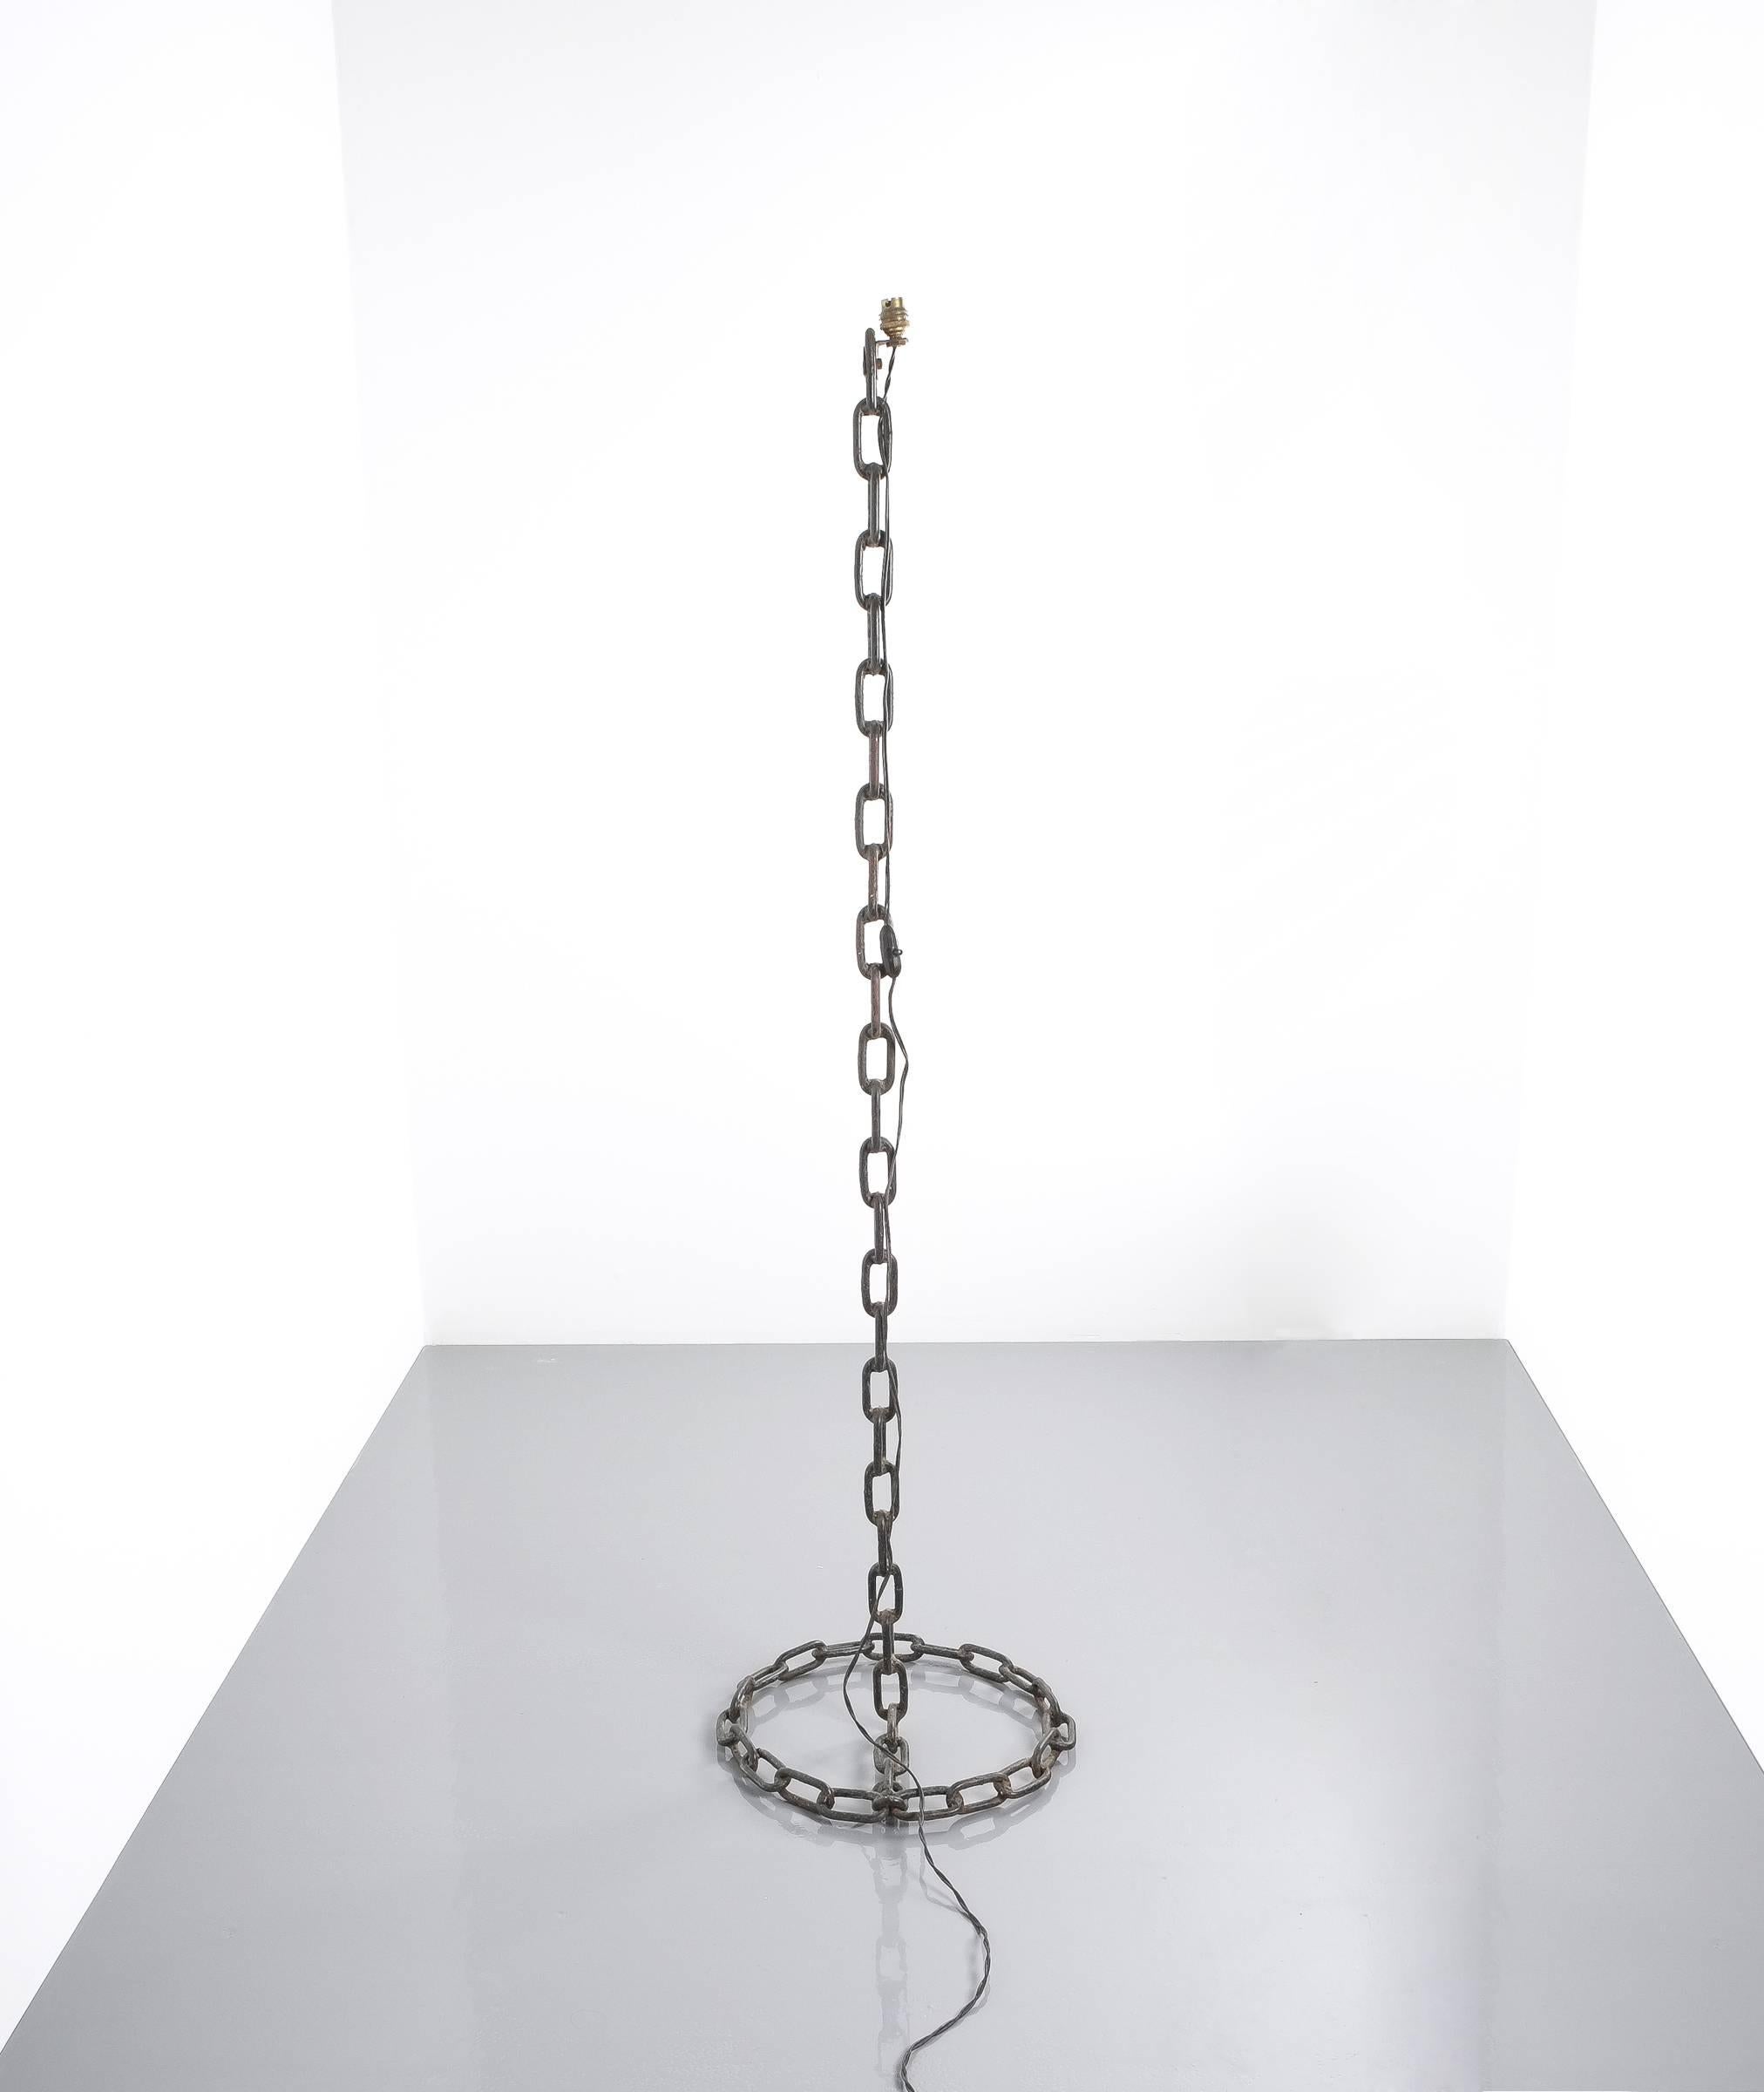 Nautical floor lamp iron chain links, France 1970 style Franz West. Large welded chain-link floor light with a single bulb (original French bayonet bulb) Good original, cleaned condition. It has not been rewired, but we can provide new rewiring if